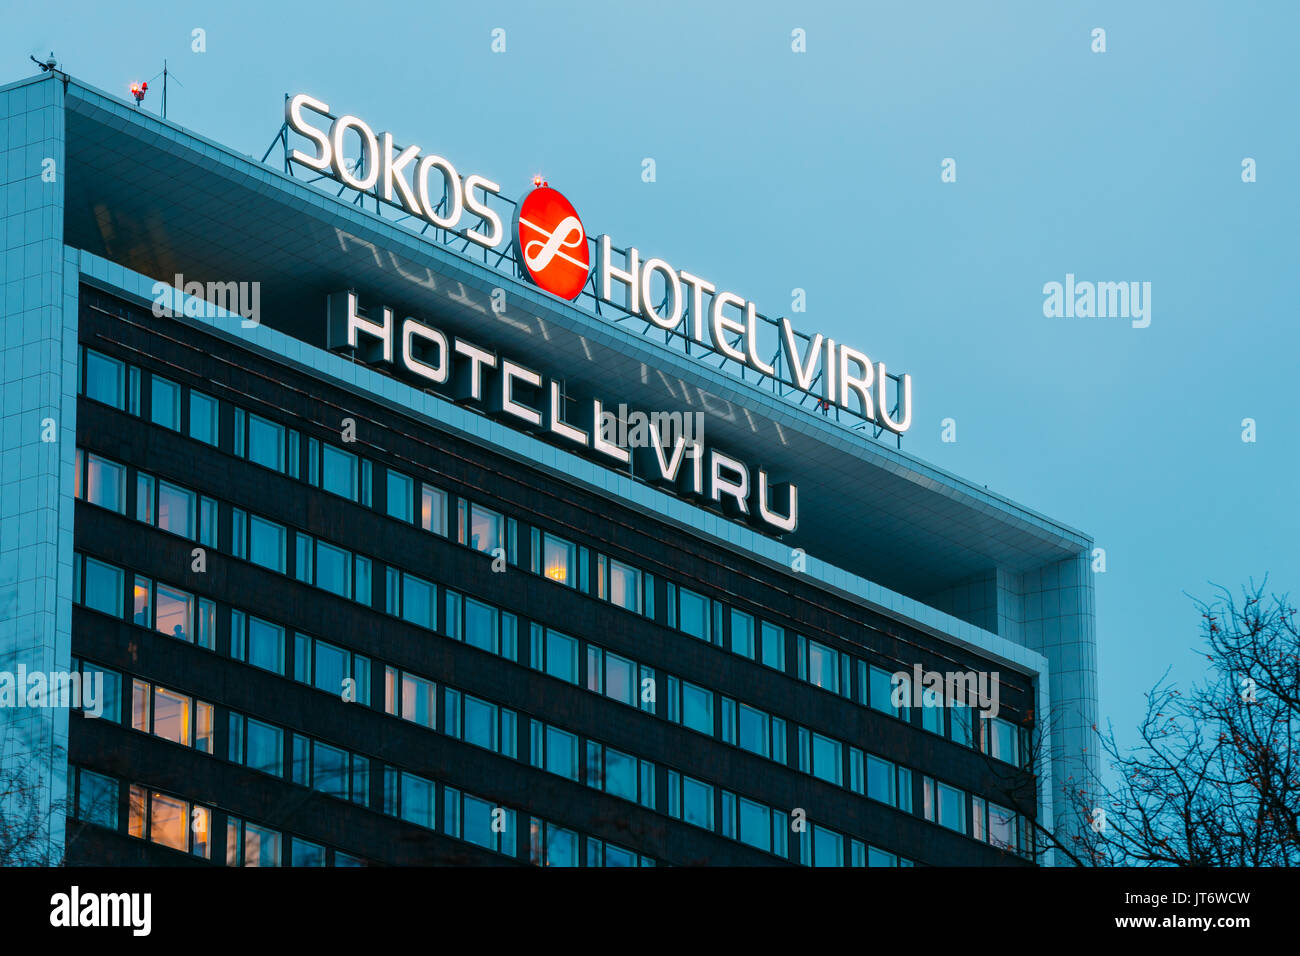 Tallinn, Estonia - December 3, 2016: Sokos Hotel Viru Owned By Intourist And Called Viru Hotell Is Connected To The Shopping Centre Viru Keskus Stock Photo